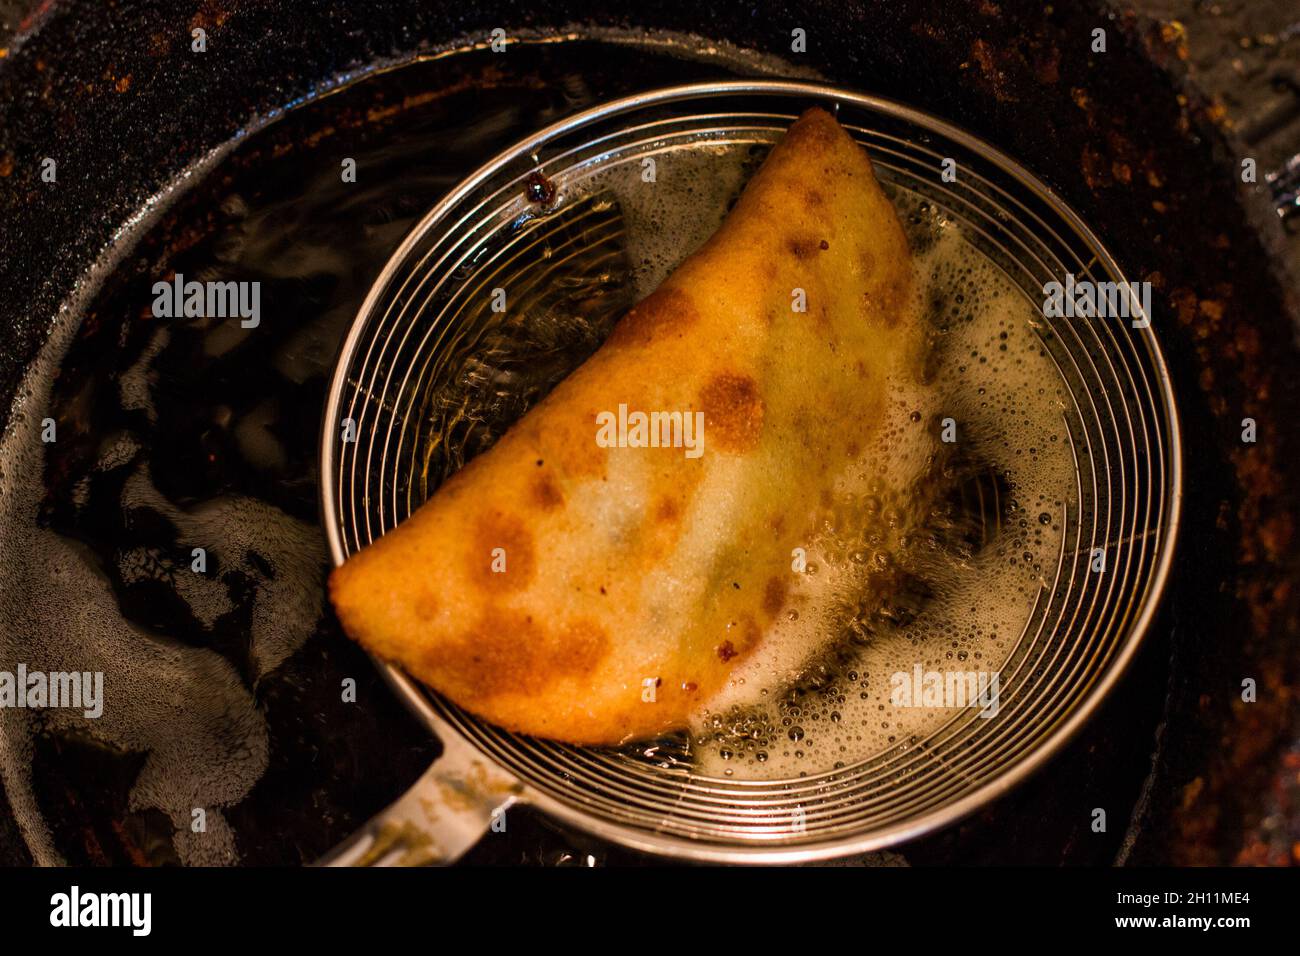 Closeup of newly cooked empanada scooped out from a pot and drained Stock Photo